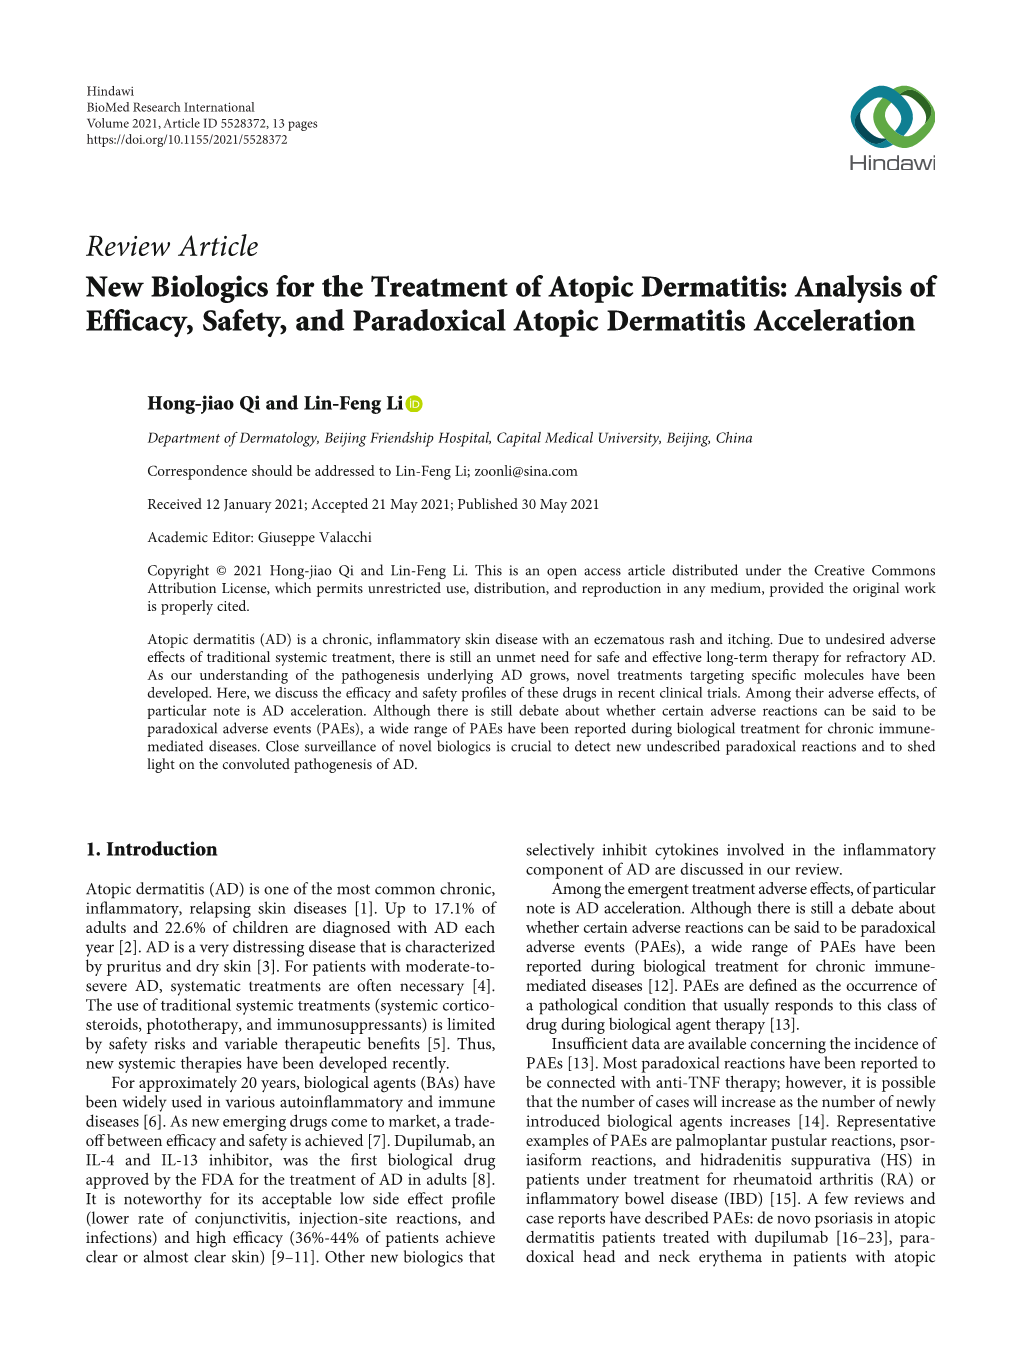 New Biologics for the Treatment of Atopic Dermatitis: Analysis of Efficacy, Safety, and Paradoxical Atopic Dermatitis Acceleration